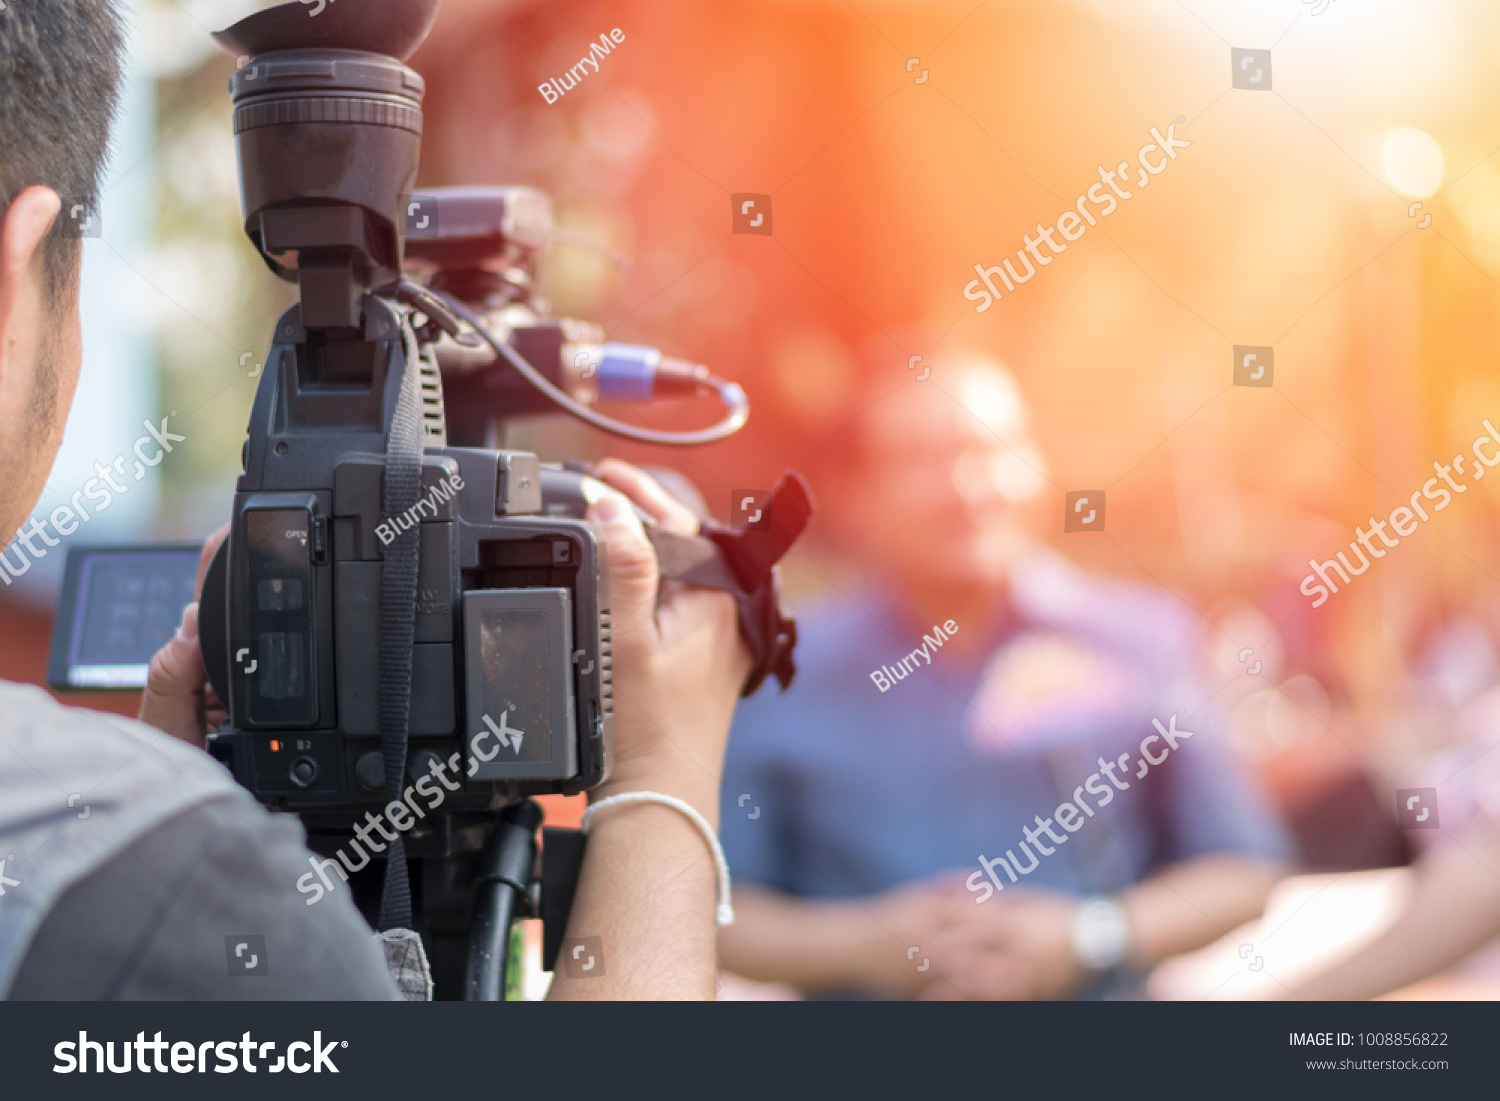 Behind the scene concept. Cameraman working on professional camera taking film interviewer interview celebrity people making news outdoors.  #1008856822